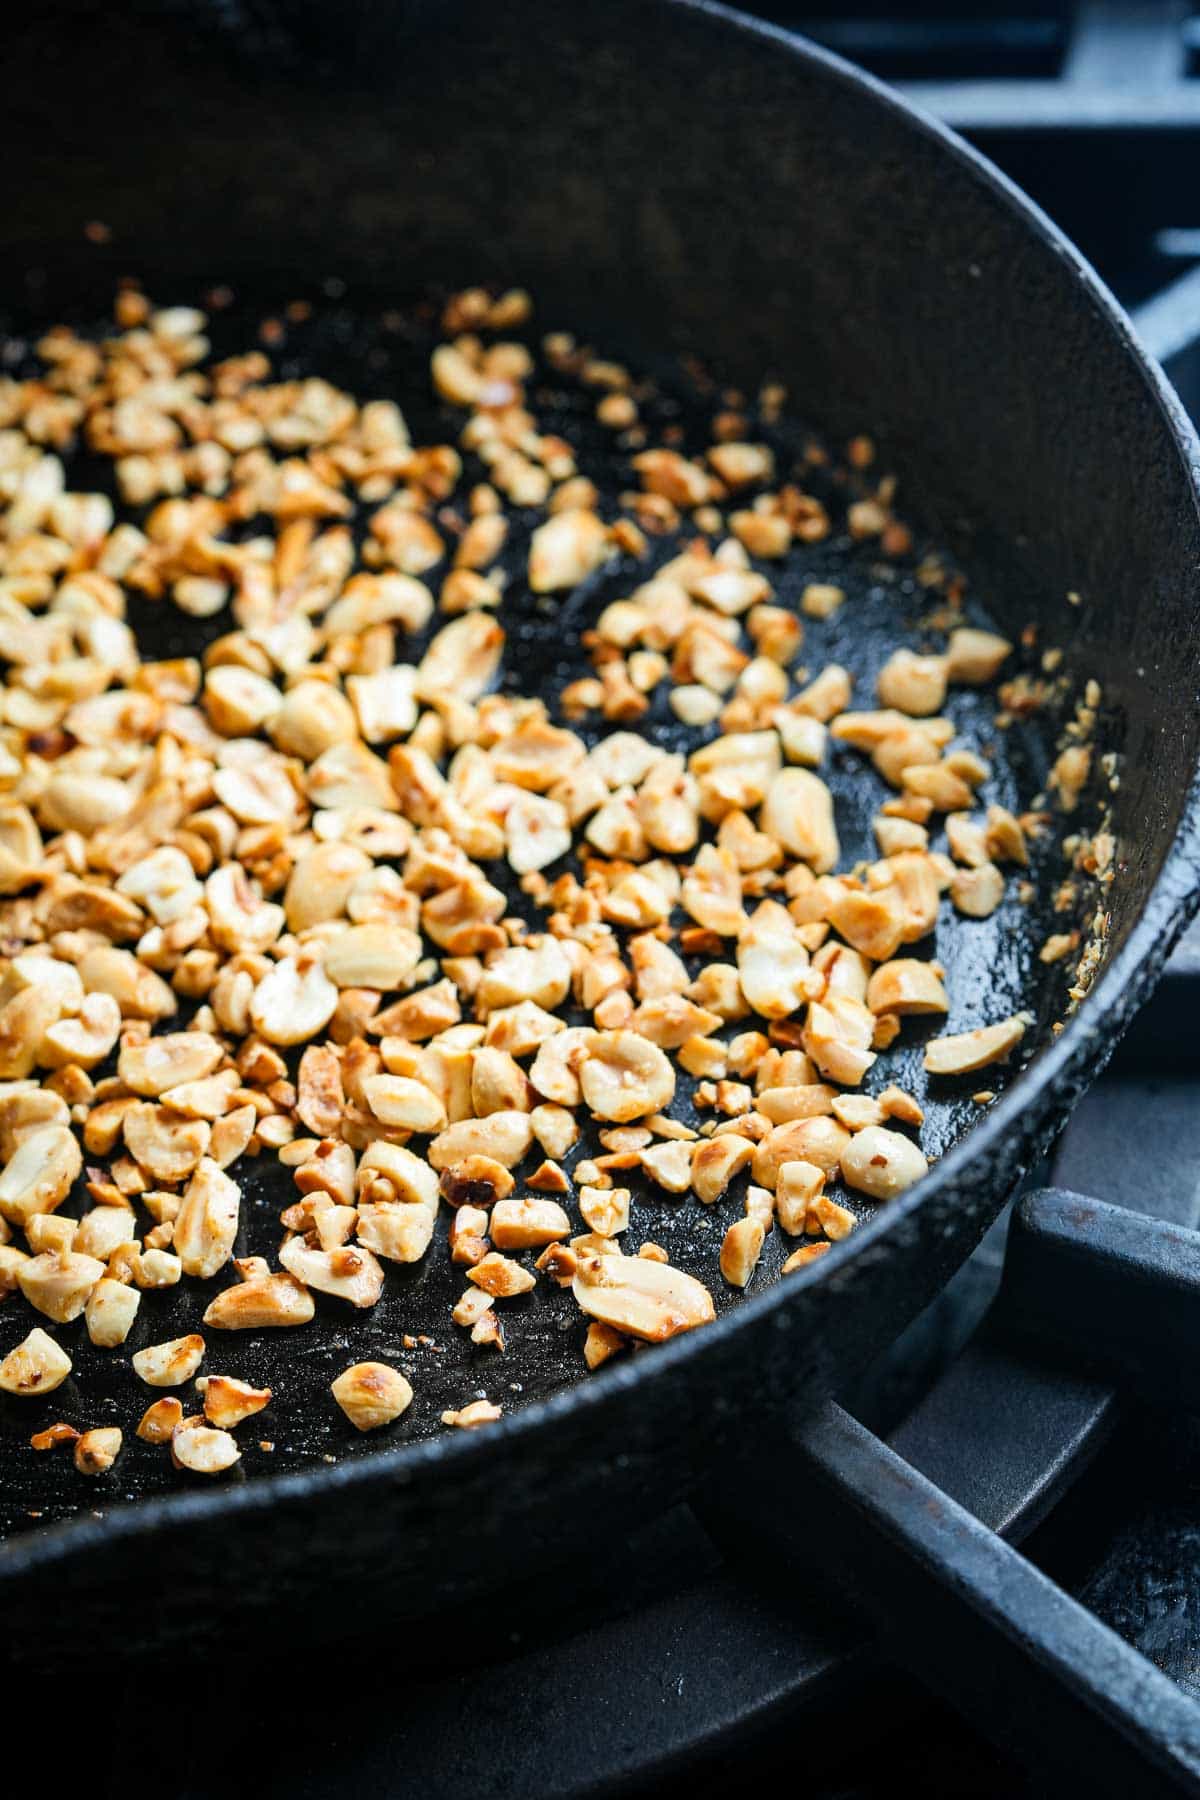 A frying pan with peanuts in it.